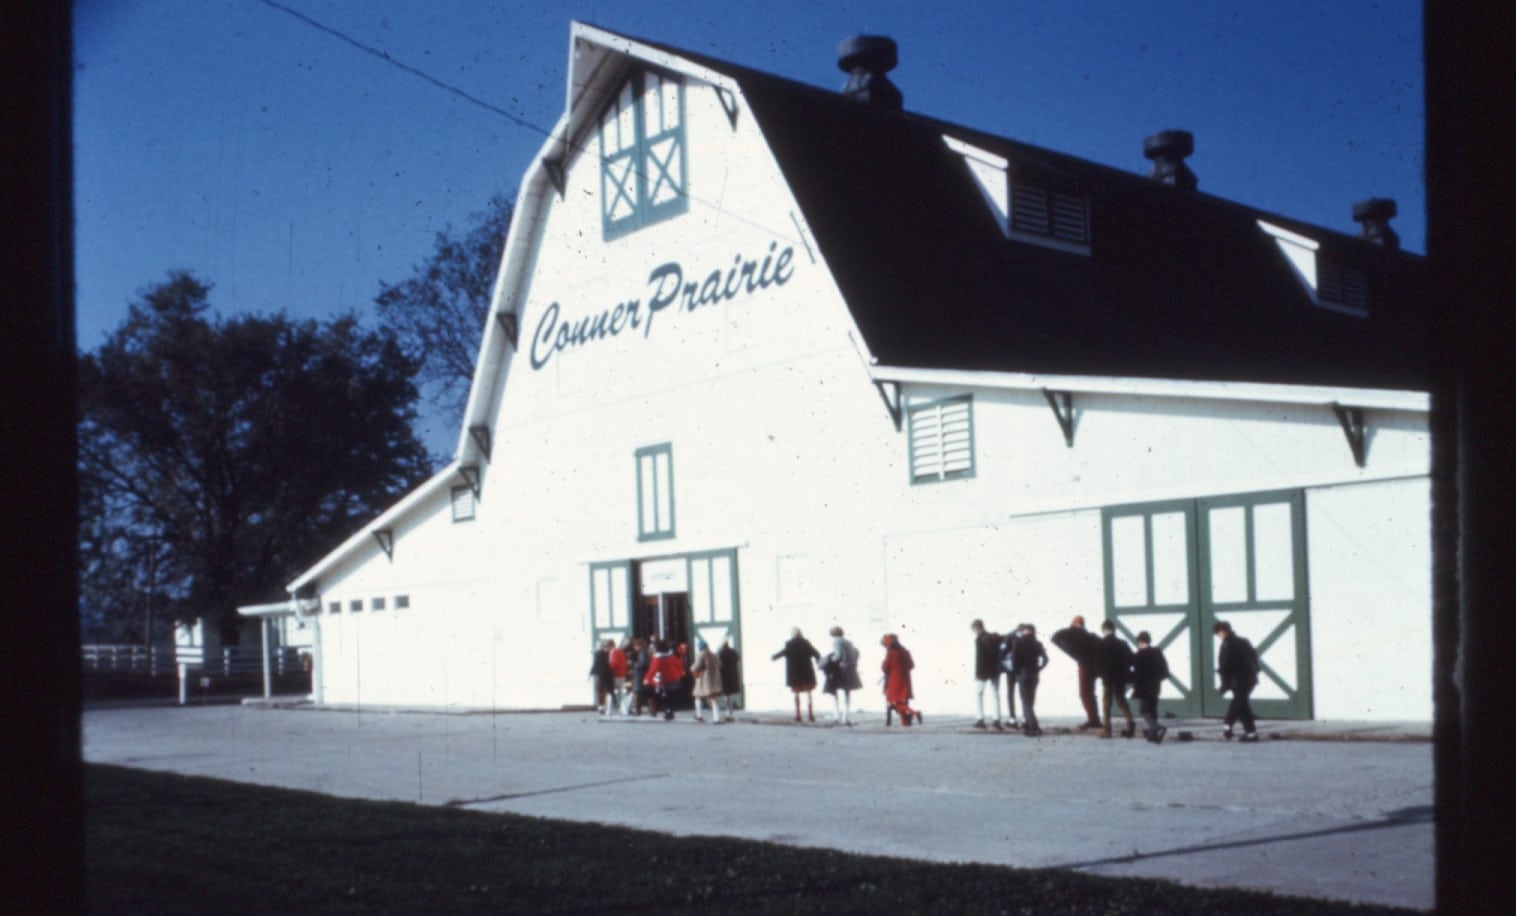 Image of the Conner Prairie Visitor Center